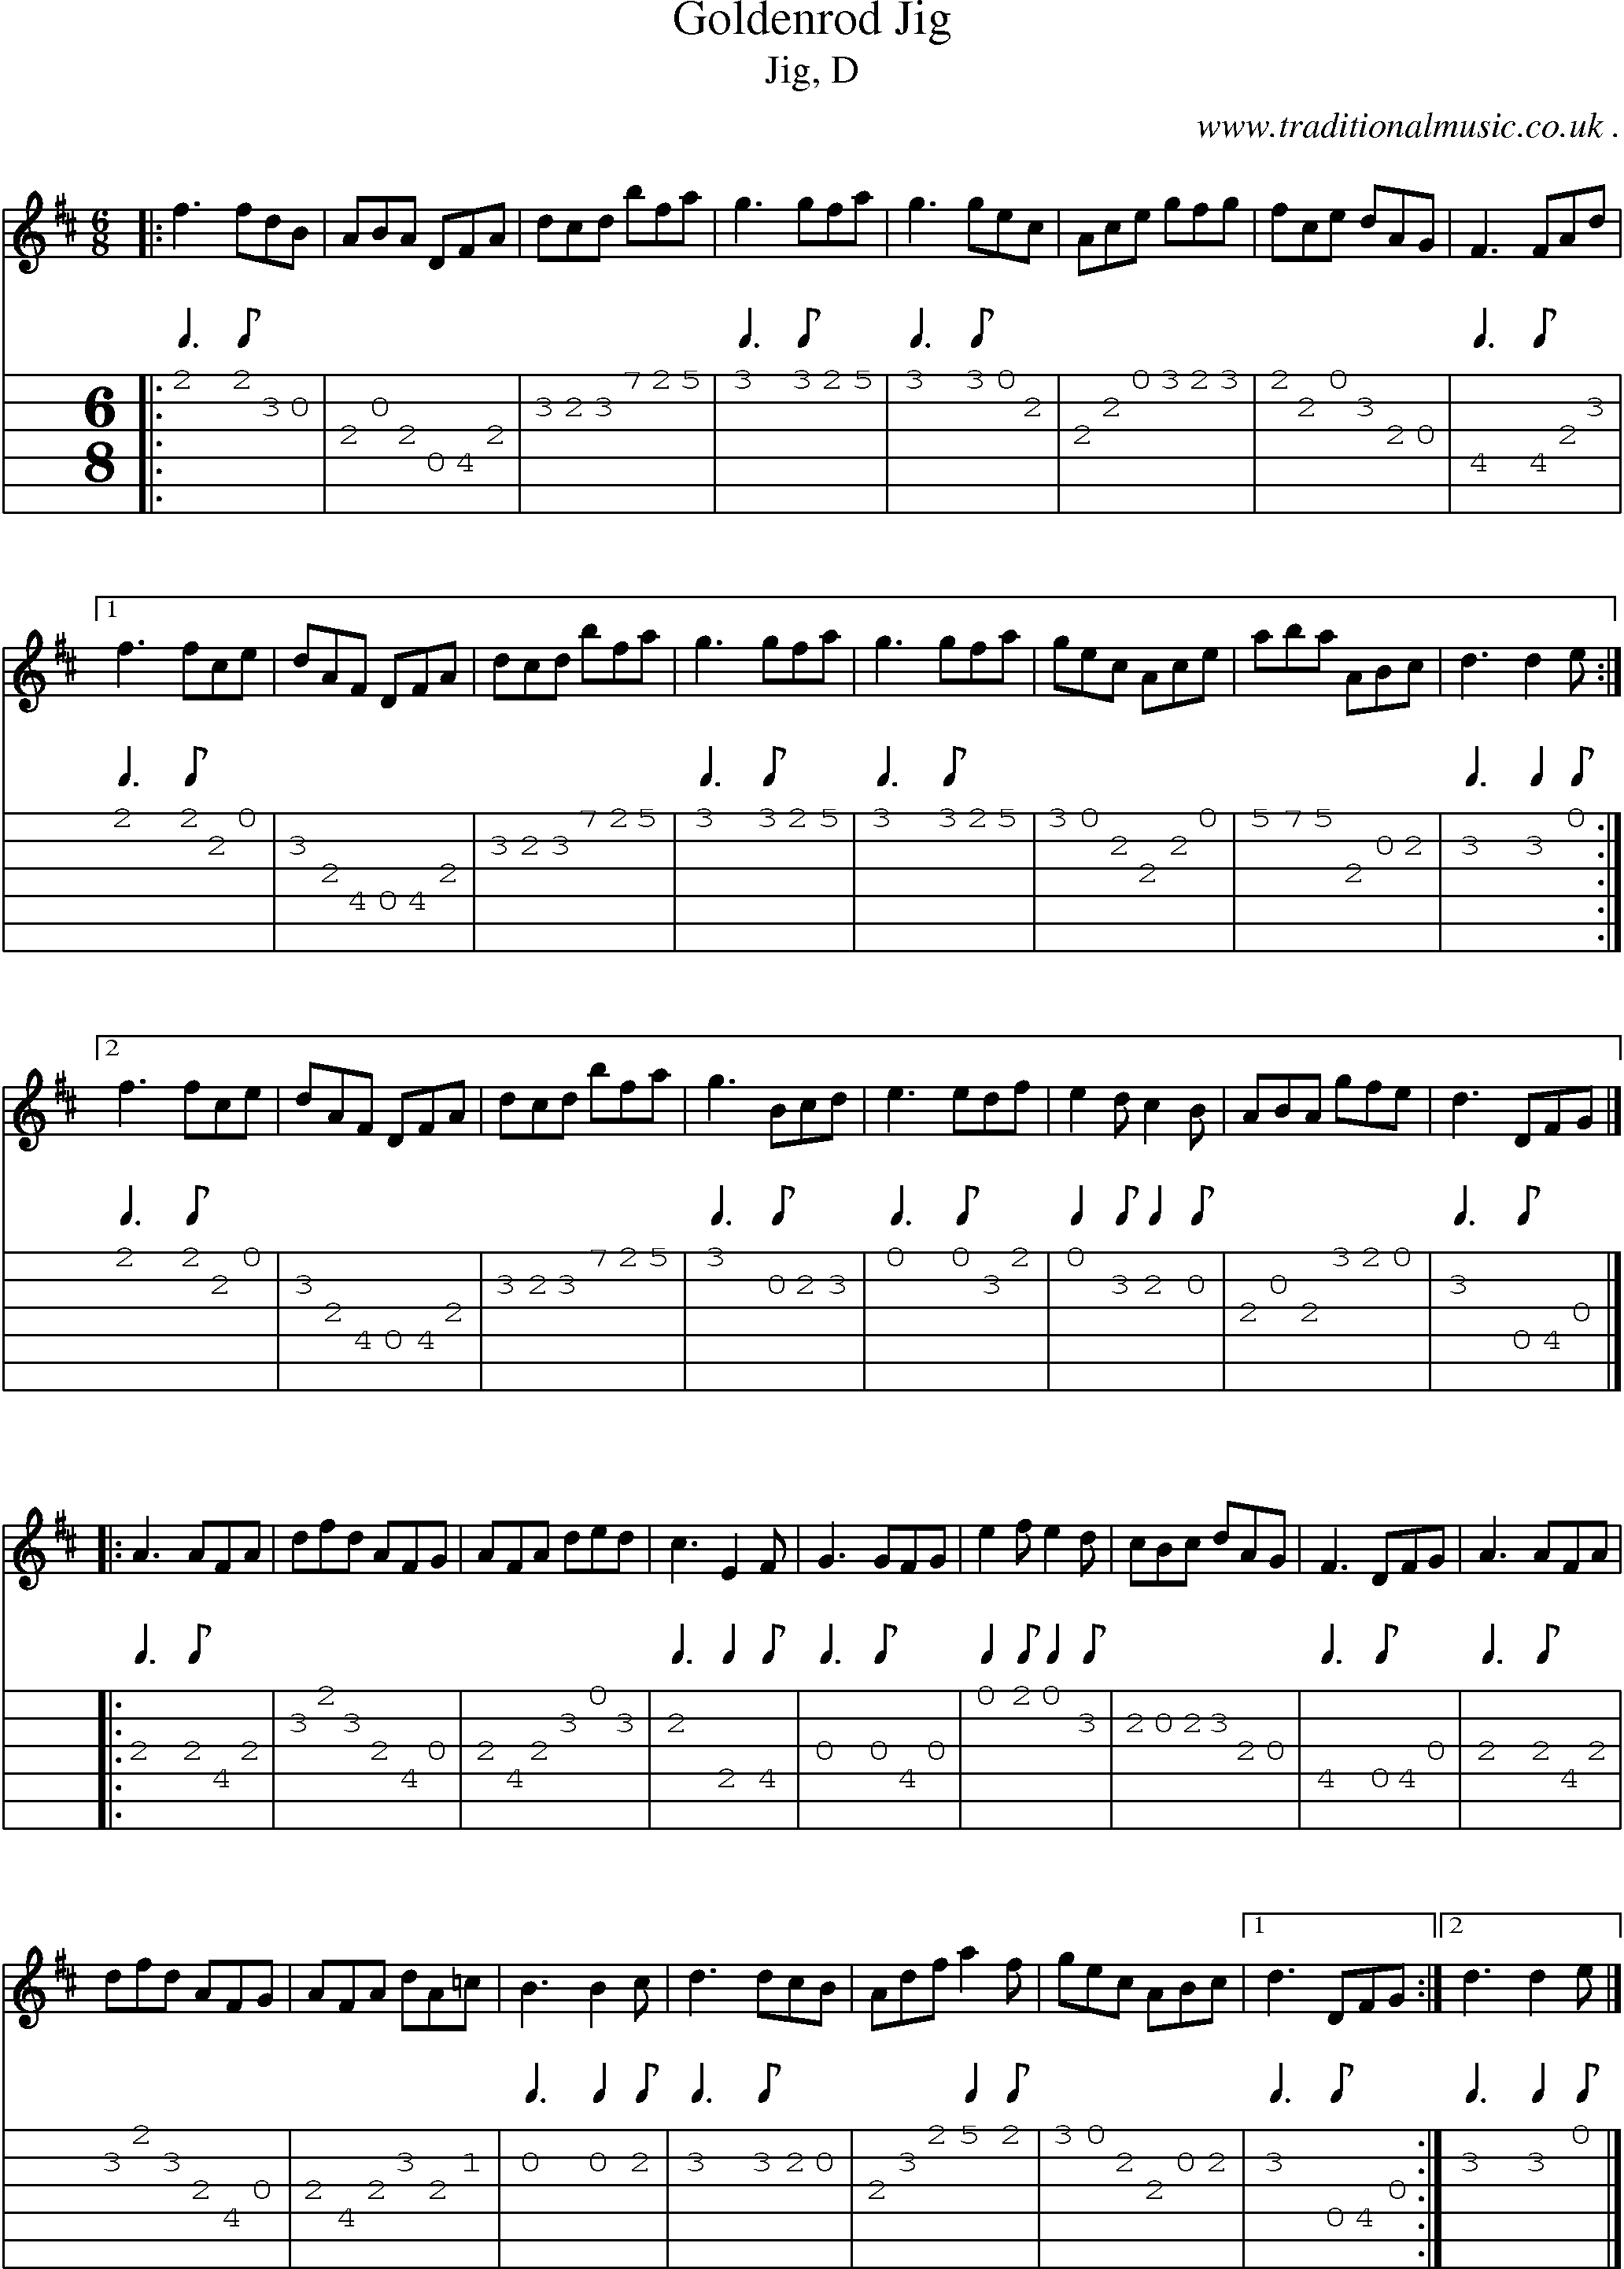 Sheet-music  score, Chords and Guitar Tabs for Goldenrod Jig